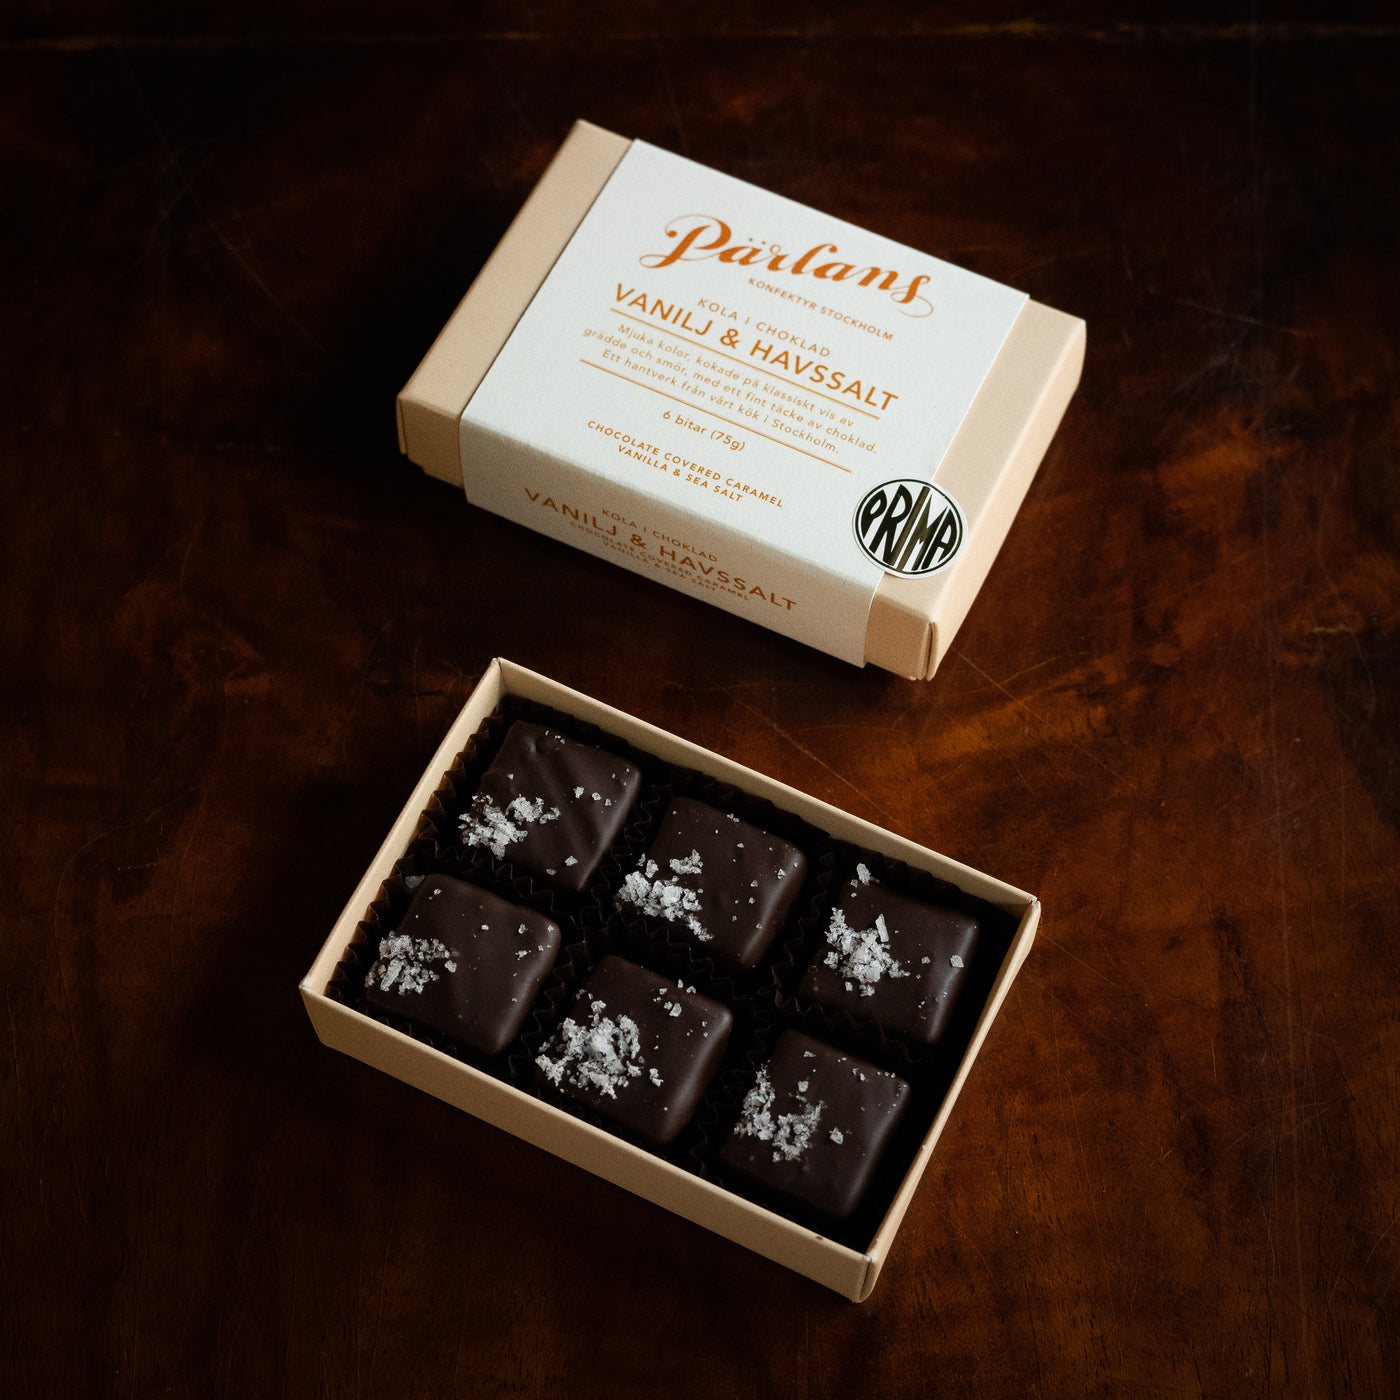 A charming box with six pieces of your favourite caramel, dipped in chocolate. Treat yourself or someone you love! <br><br>VANILLA & SEA SALT – A silky smooth, chocolate covered caramel with a sprinkling of sea salt that enhances the warmth of Bourbon vanilla.